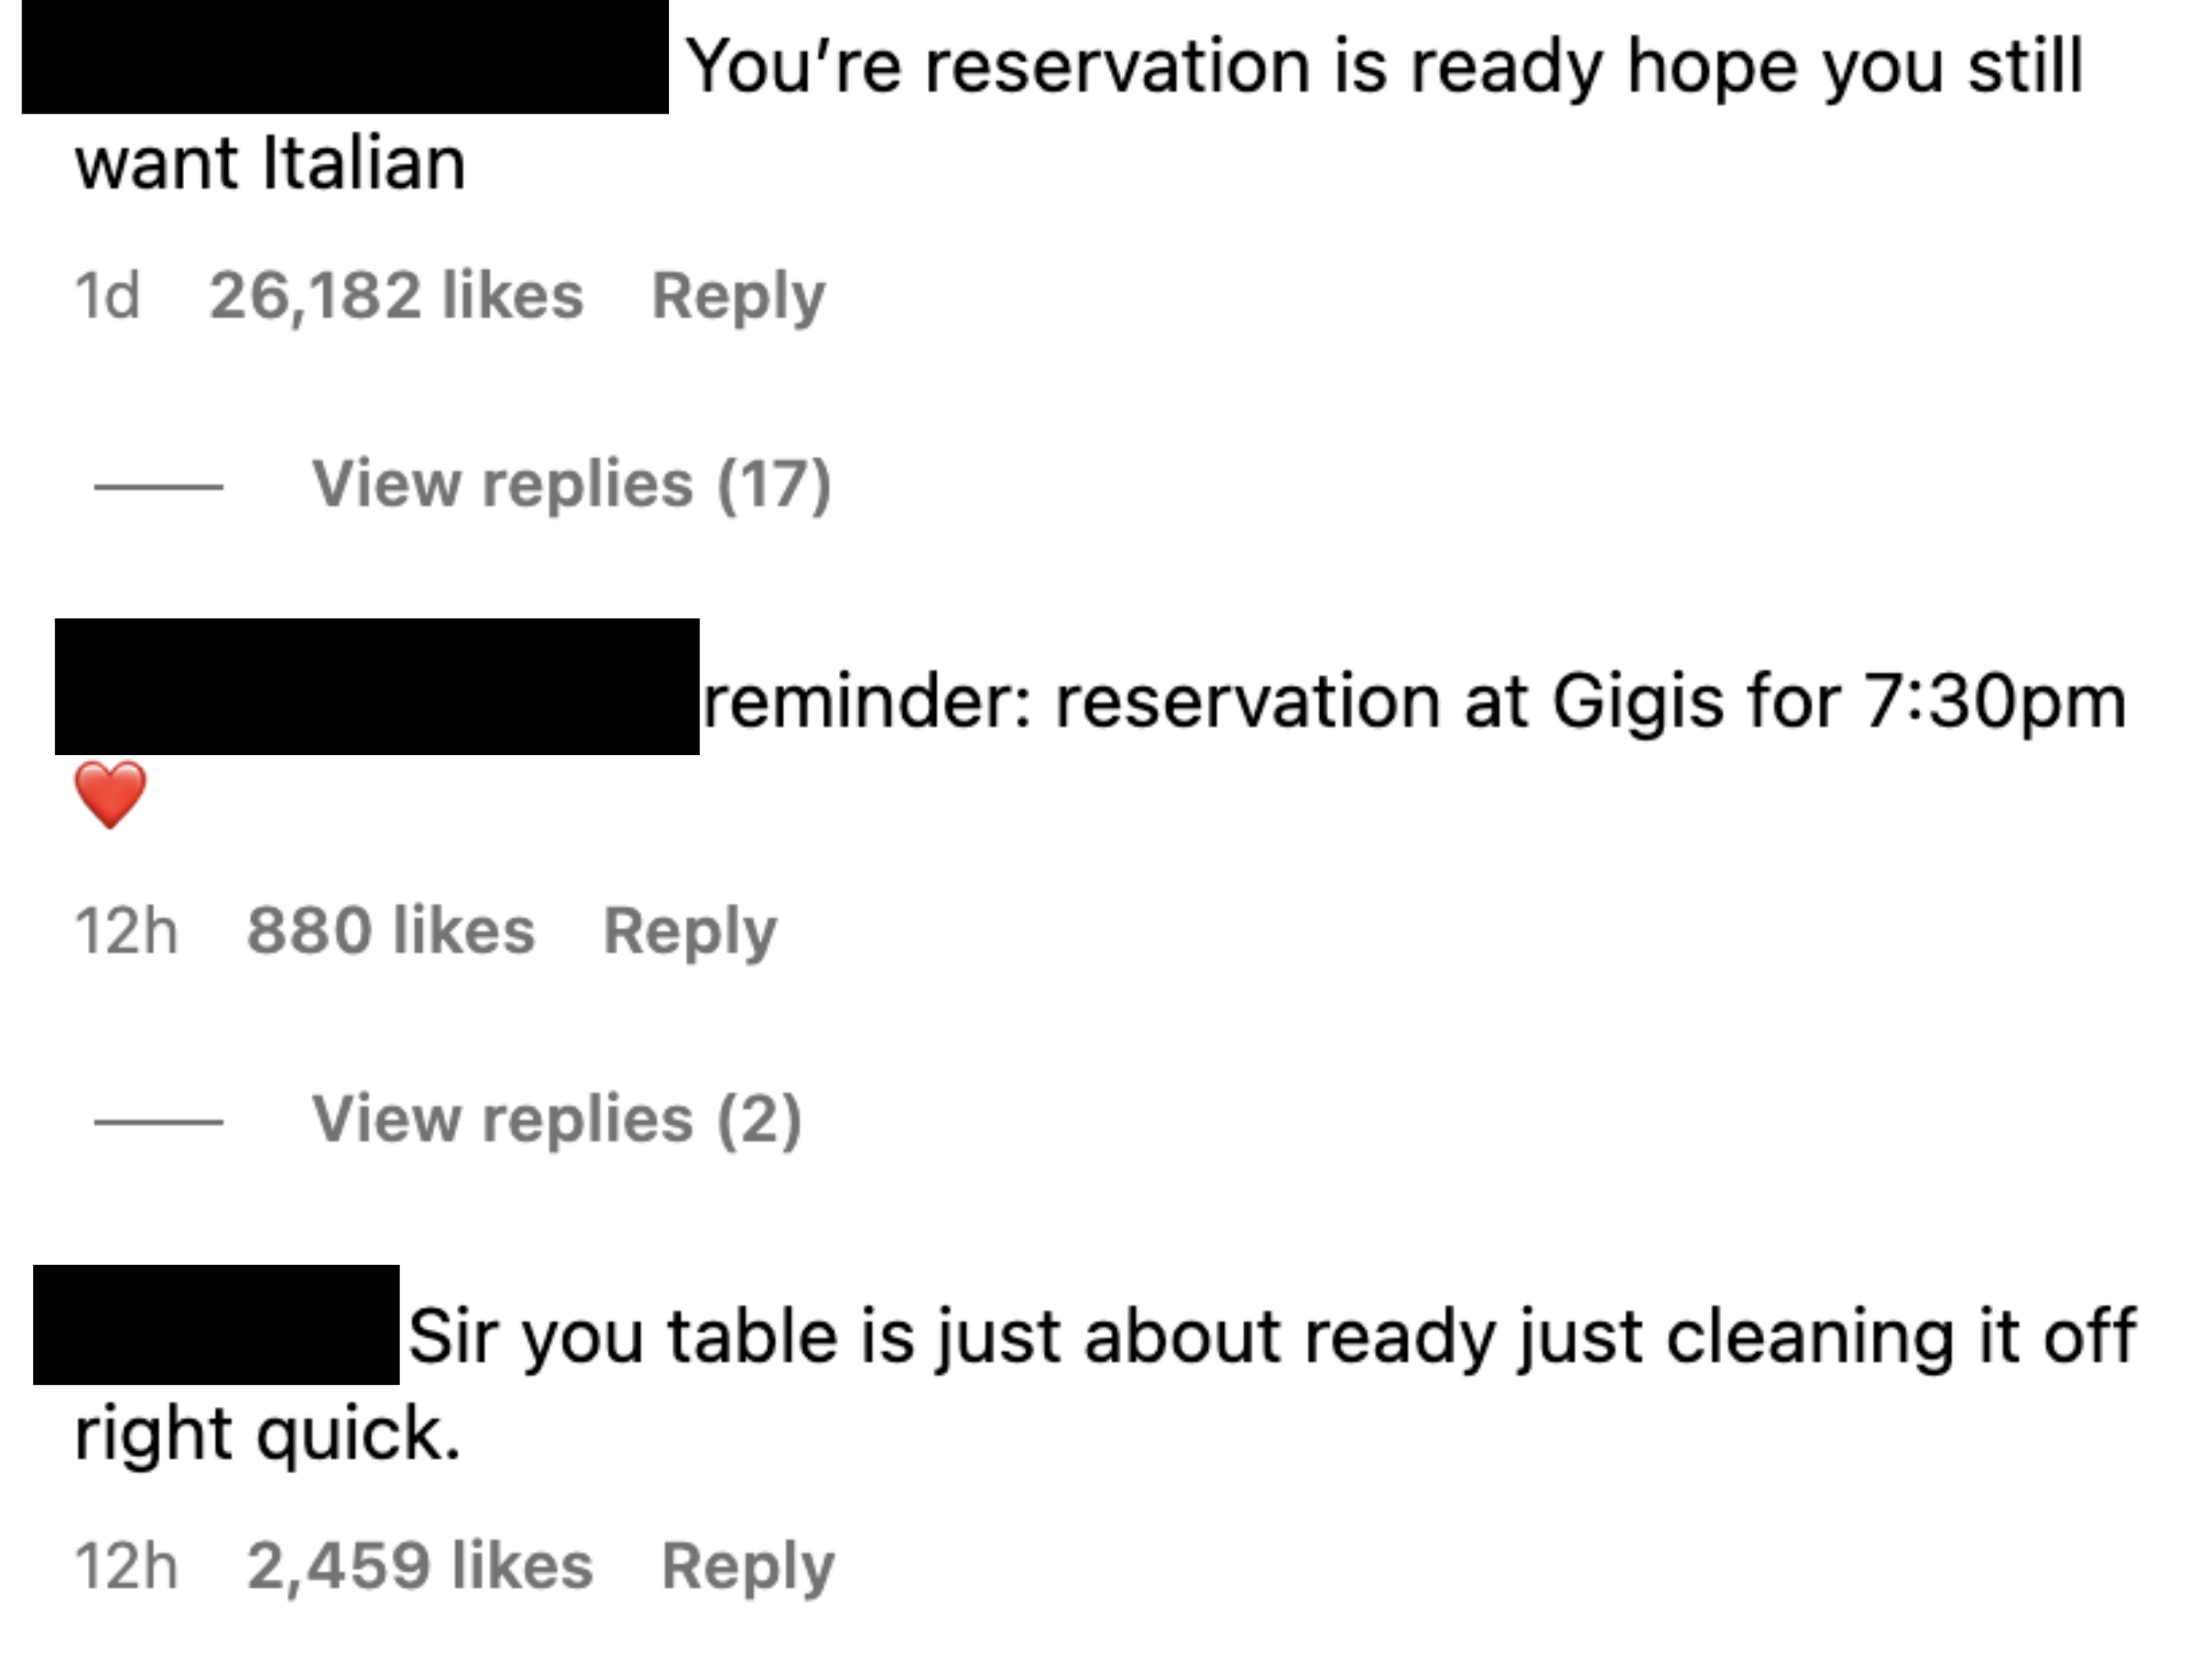 Comments: &quot;Your reservation is ready hope you still want Italian,&quot; &quot;Reminder: reservation at Gigis for 7:30 pm,&quot; and &quot;Sir, your table is just about ready just cleaning it off right quick&quot;